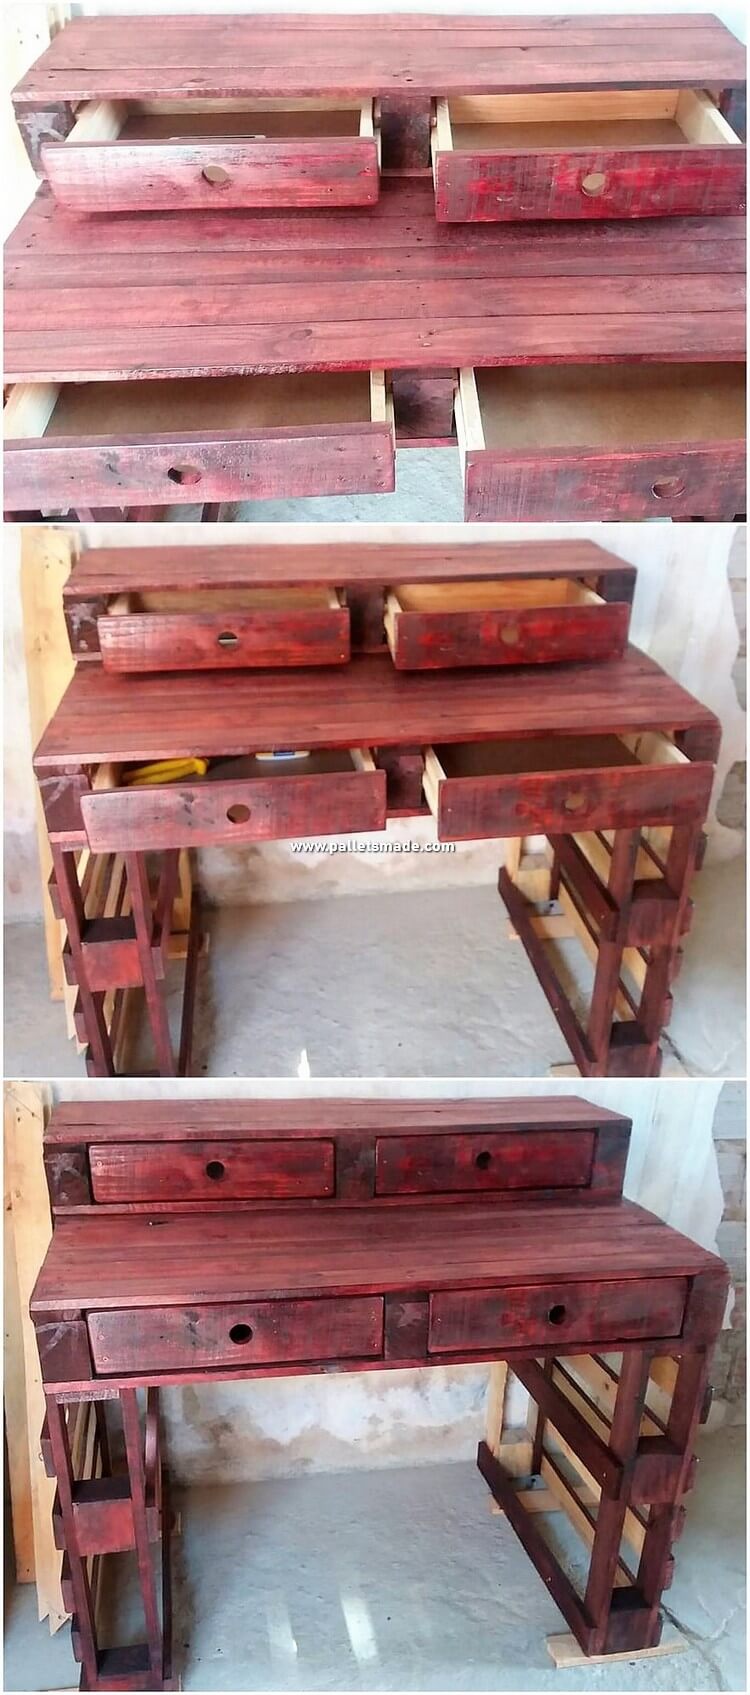 Pallet Desk with Drawers